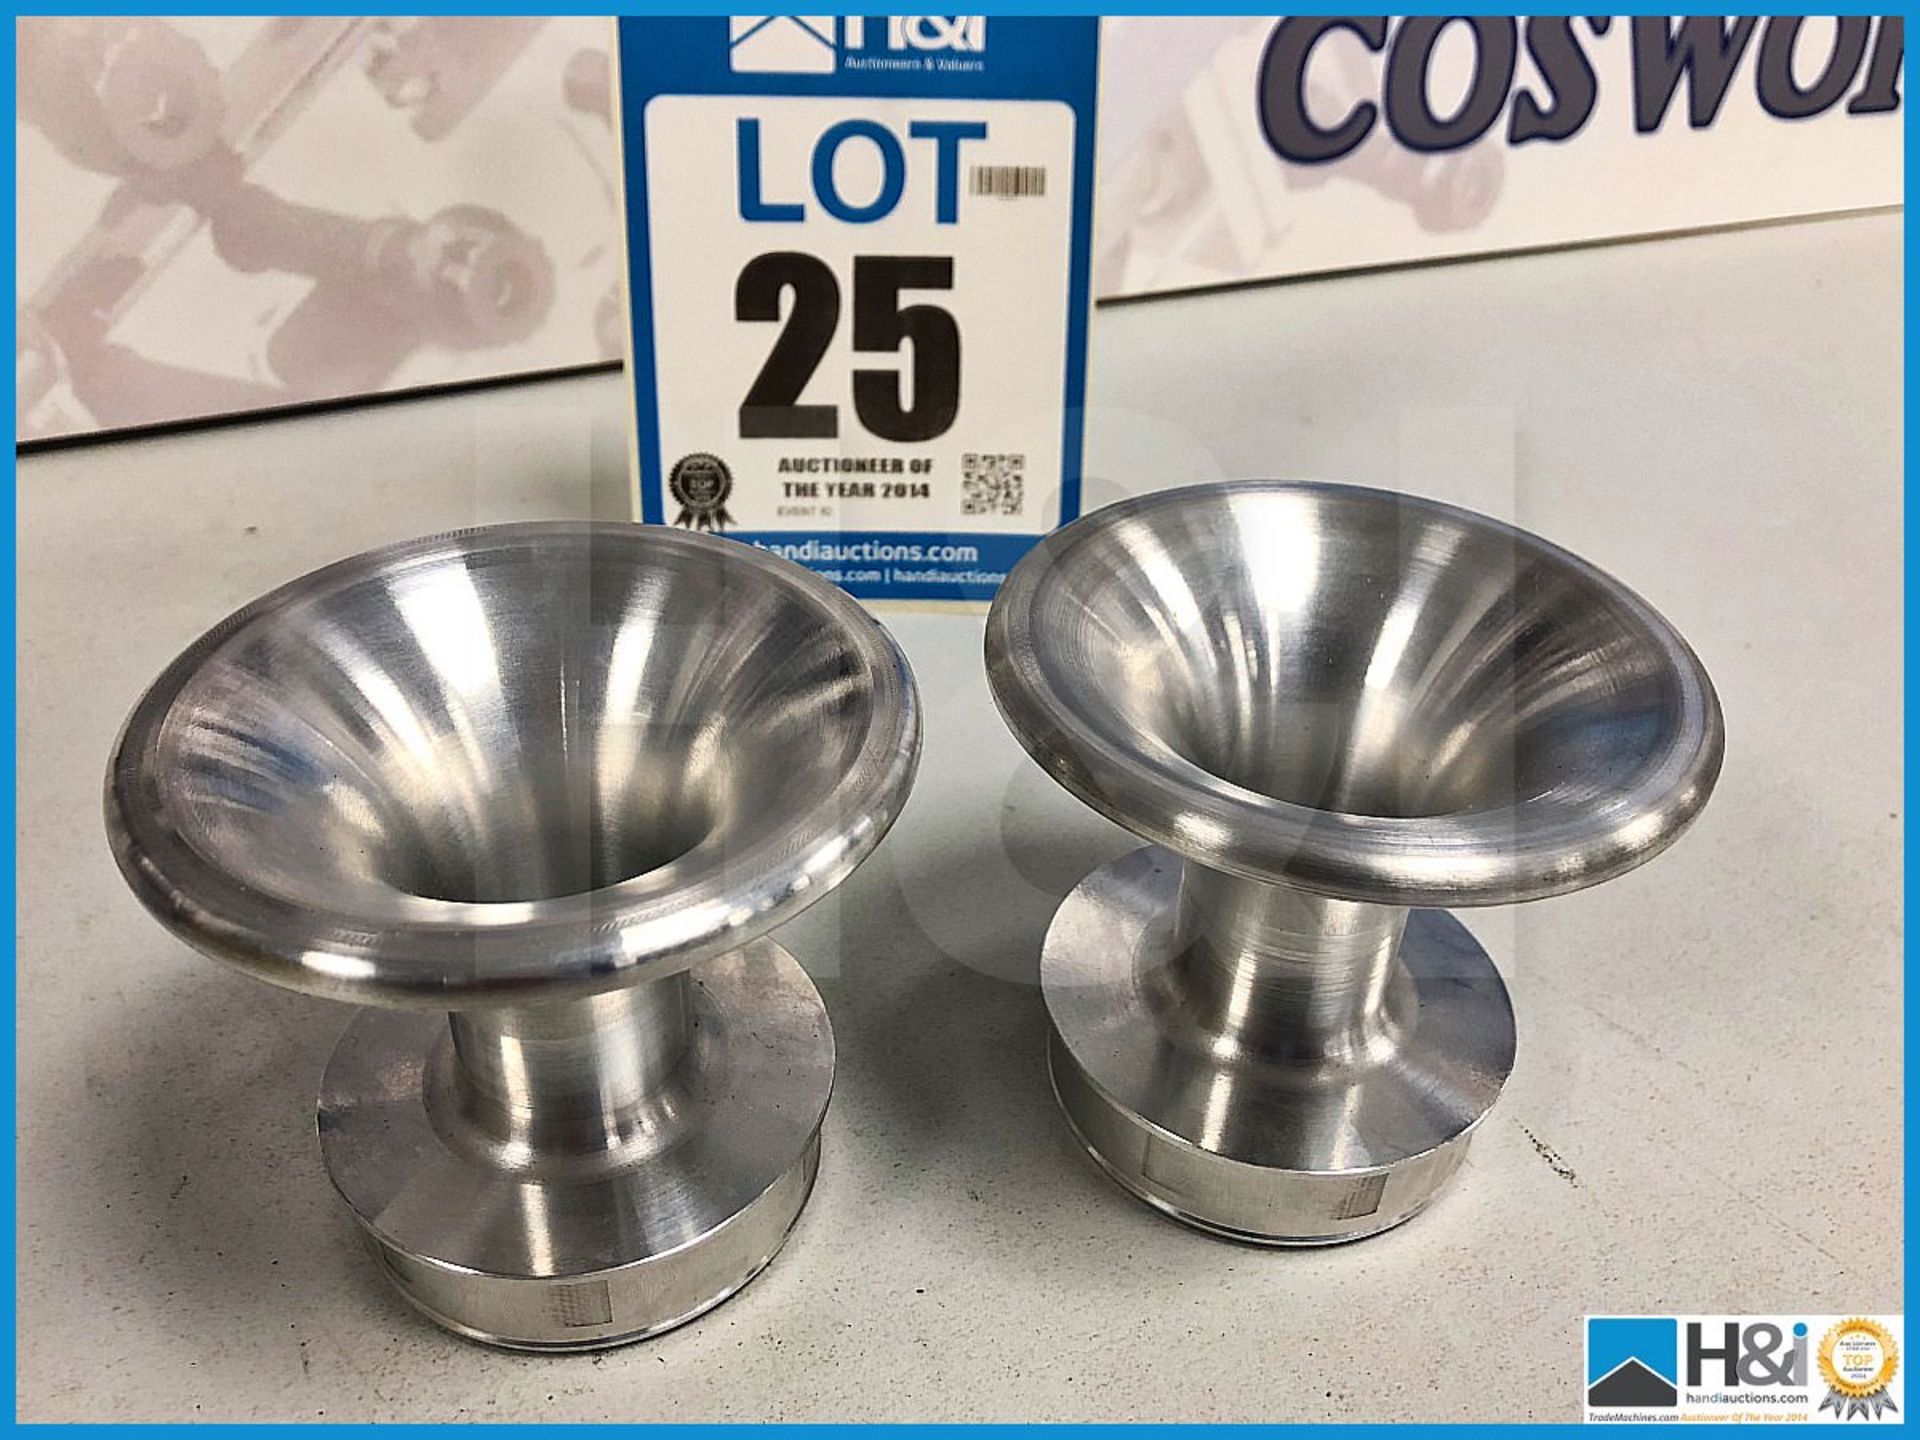 9 x Cosworth Lotus GLC GT2 trumpet air restrictor. Code: 20024592. Lot 233 - Image 2 of 3